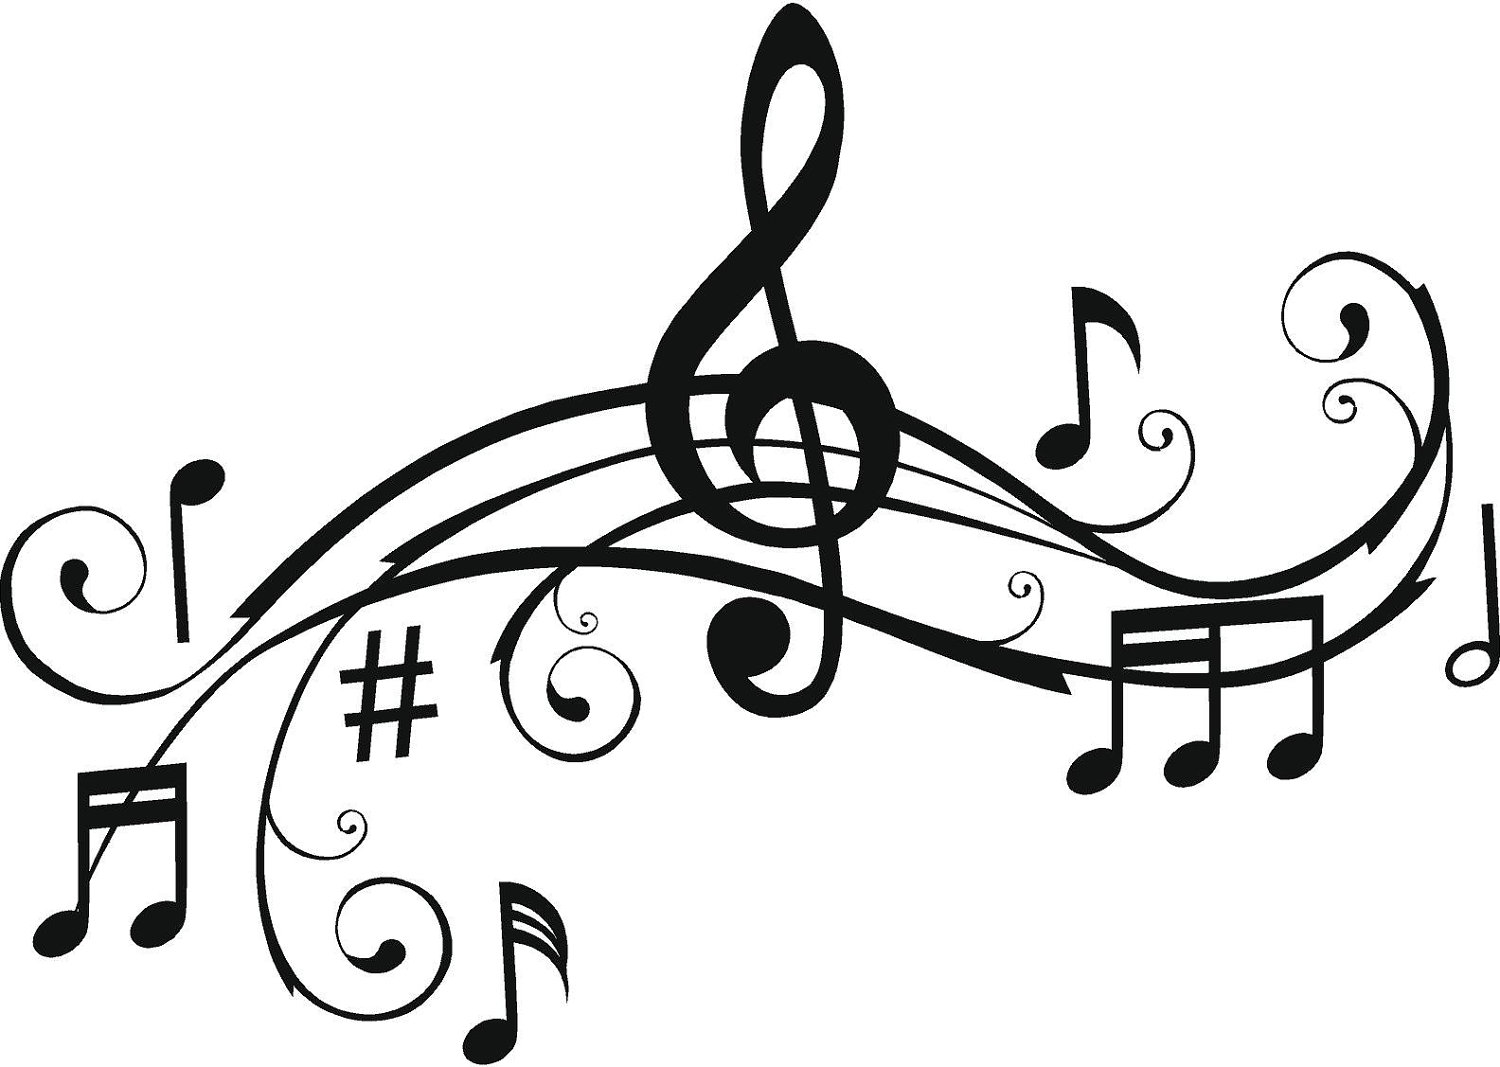 Black Musical Notes - ClipArt Best